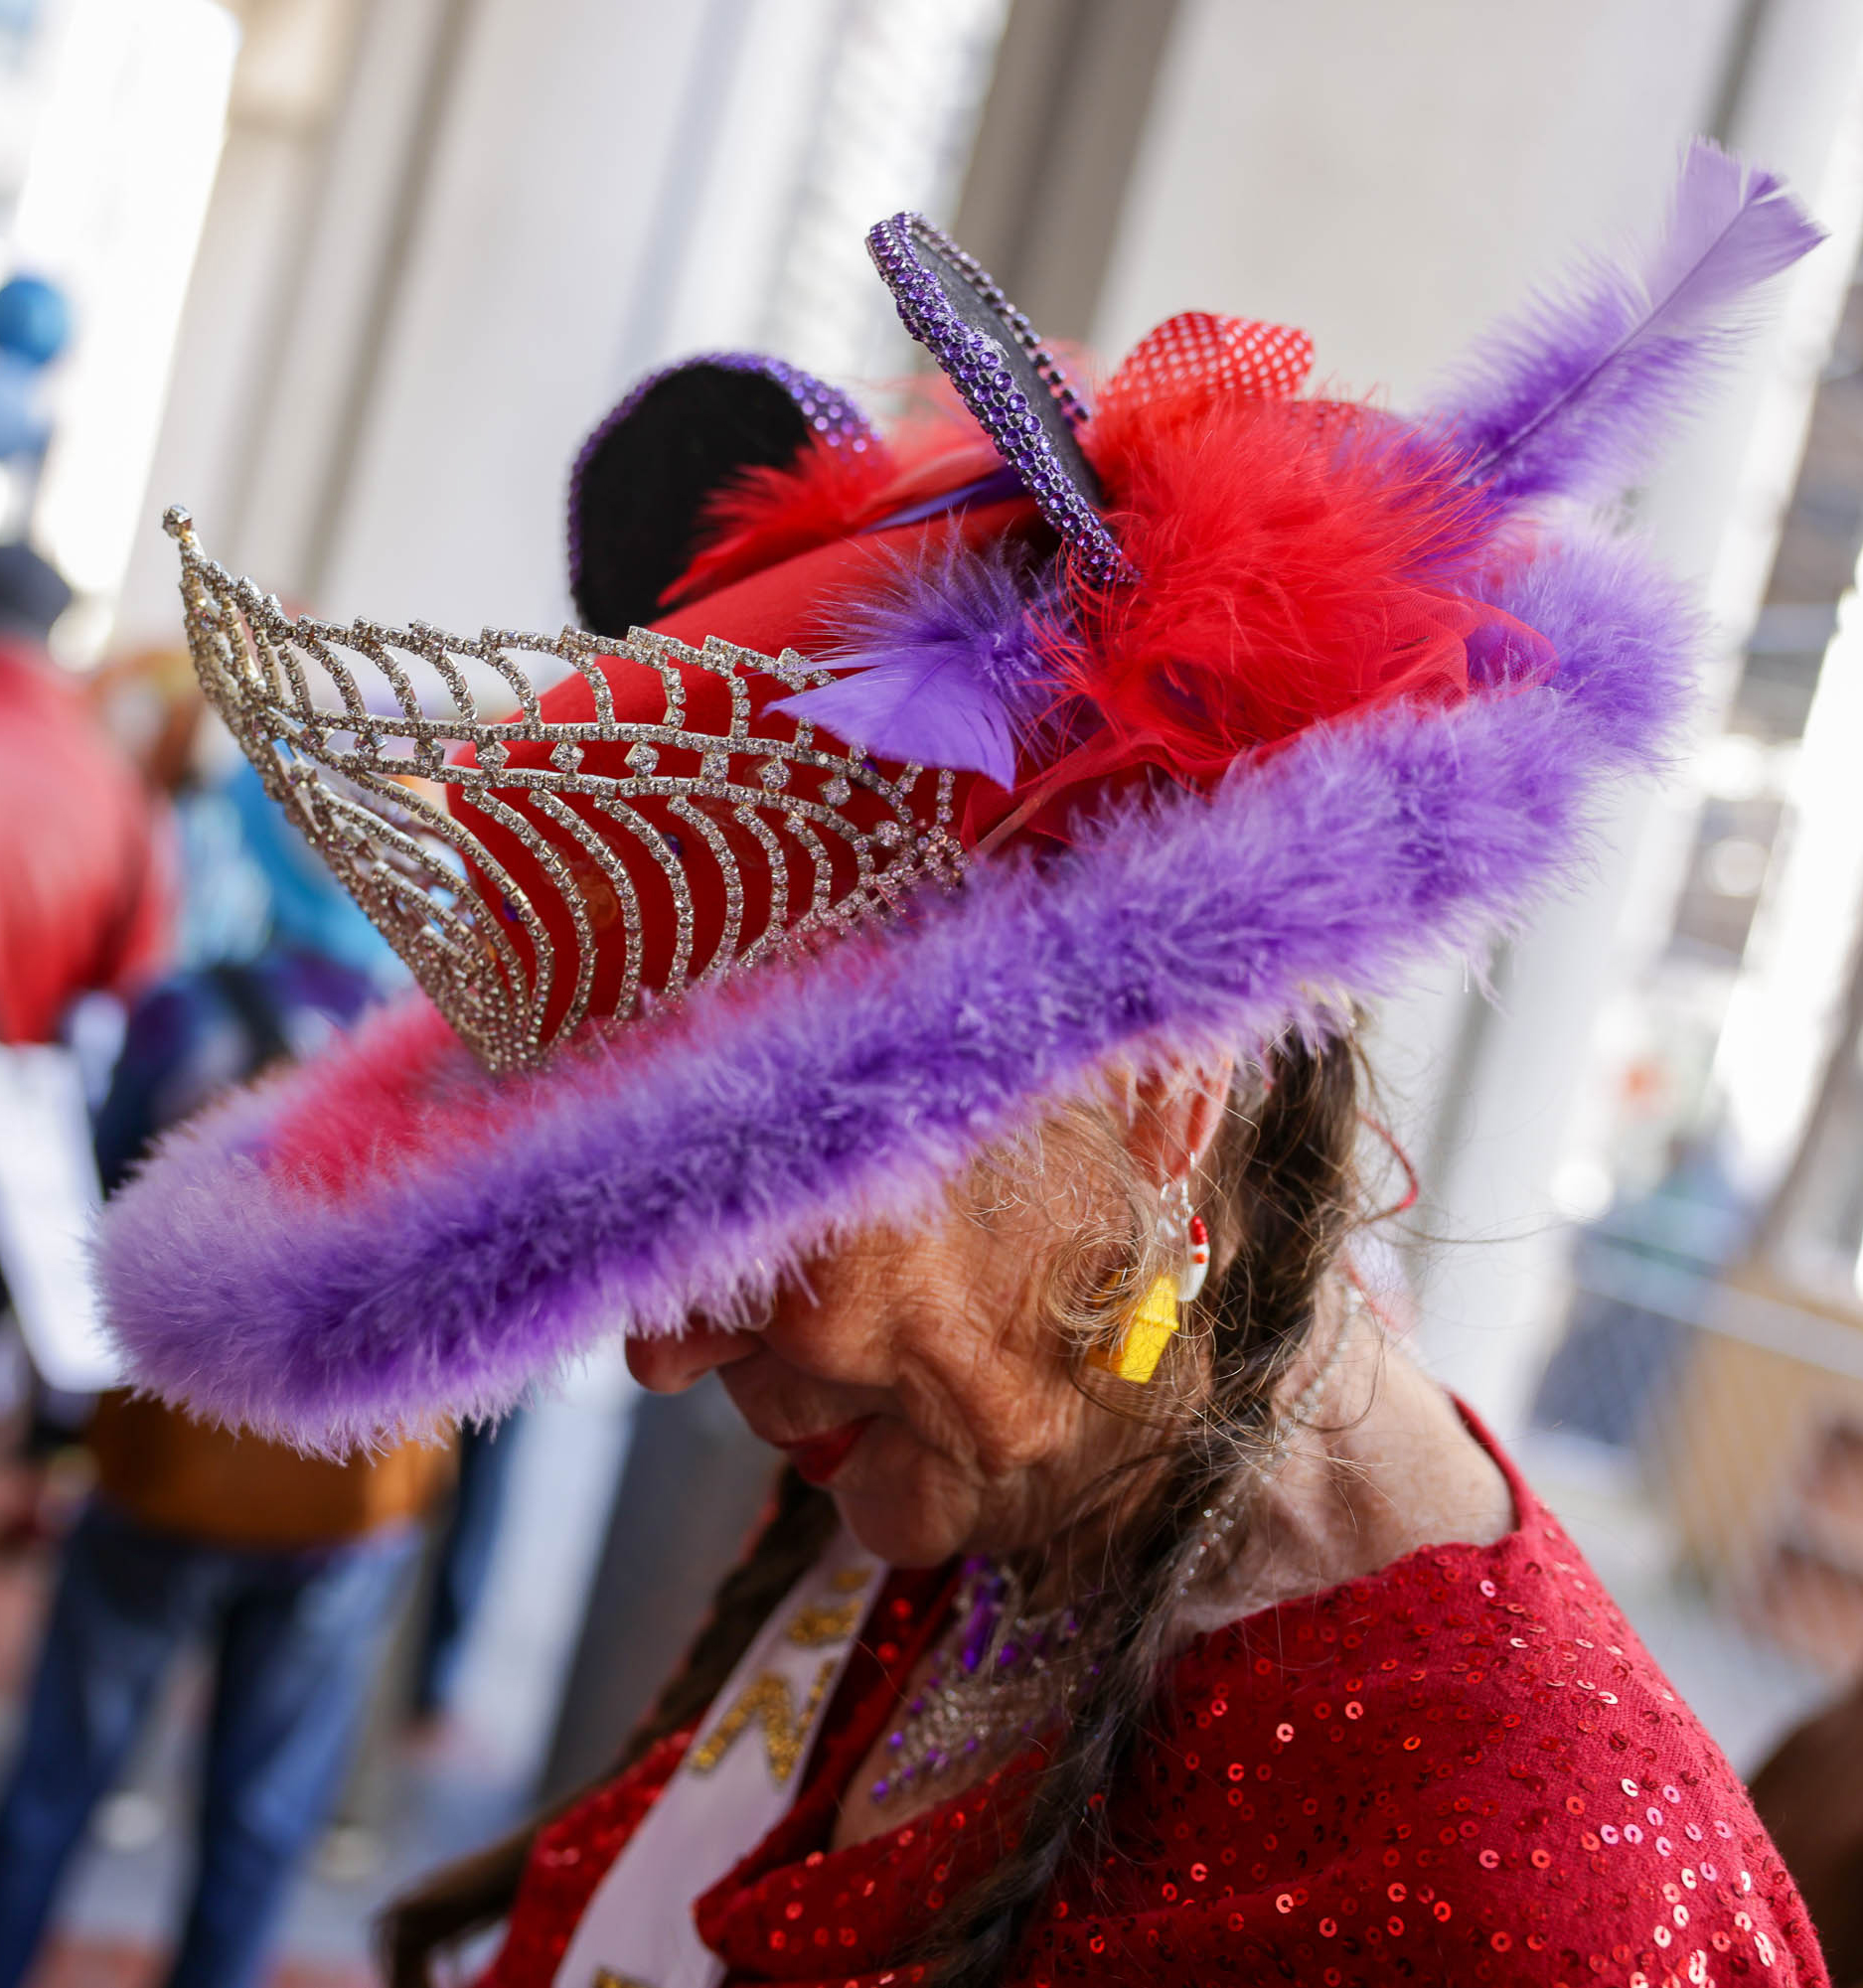 A person in a colorful, feathered hat and sequined red top. The mood suggests a festive or carnival atmosphere.